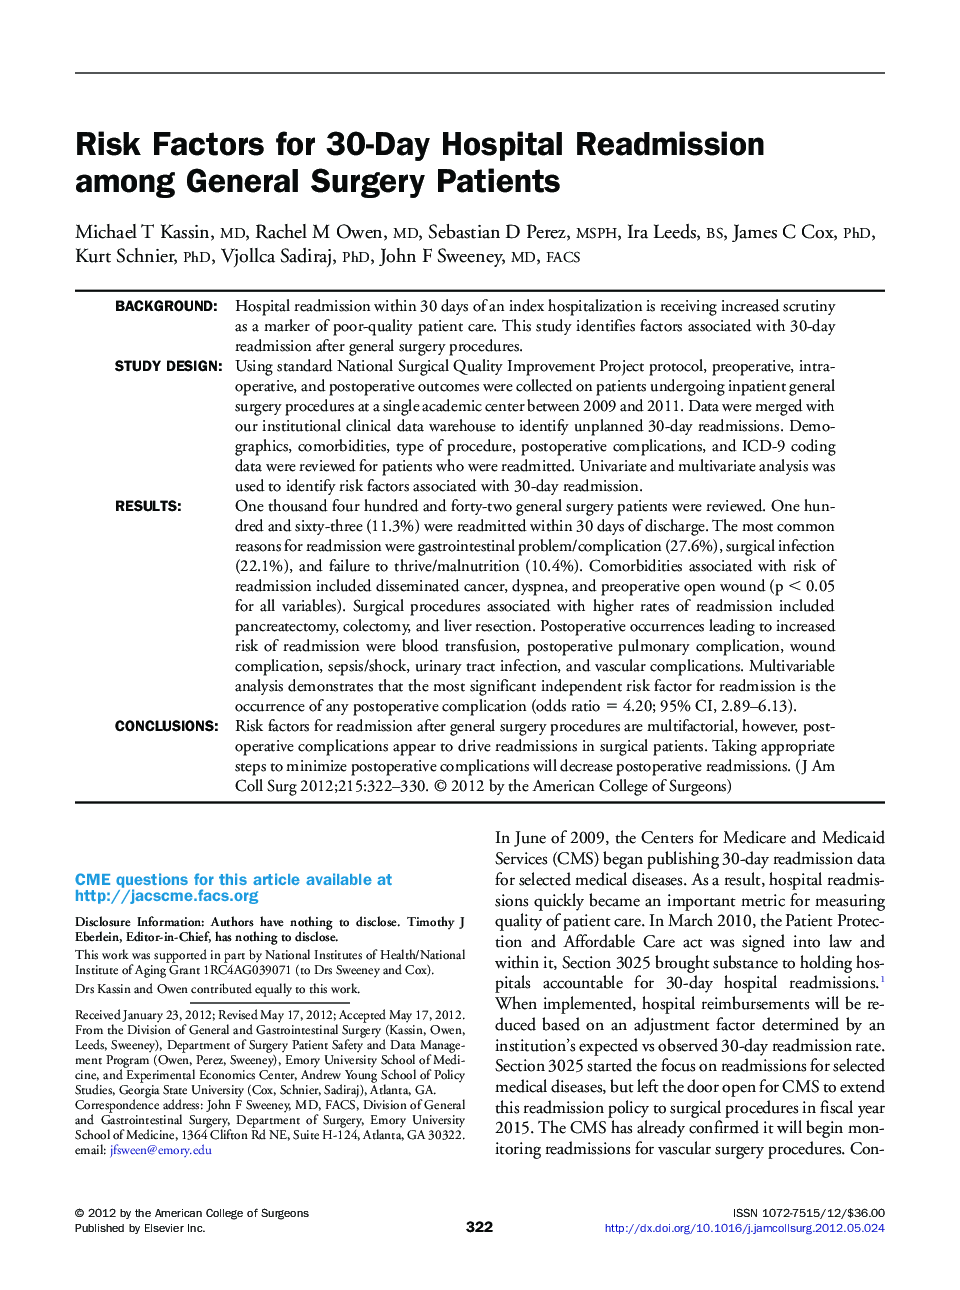 Risk Factors for 30-Day Hospital Readmission among General Surgery Patients 